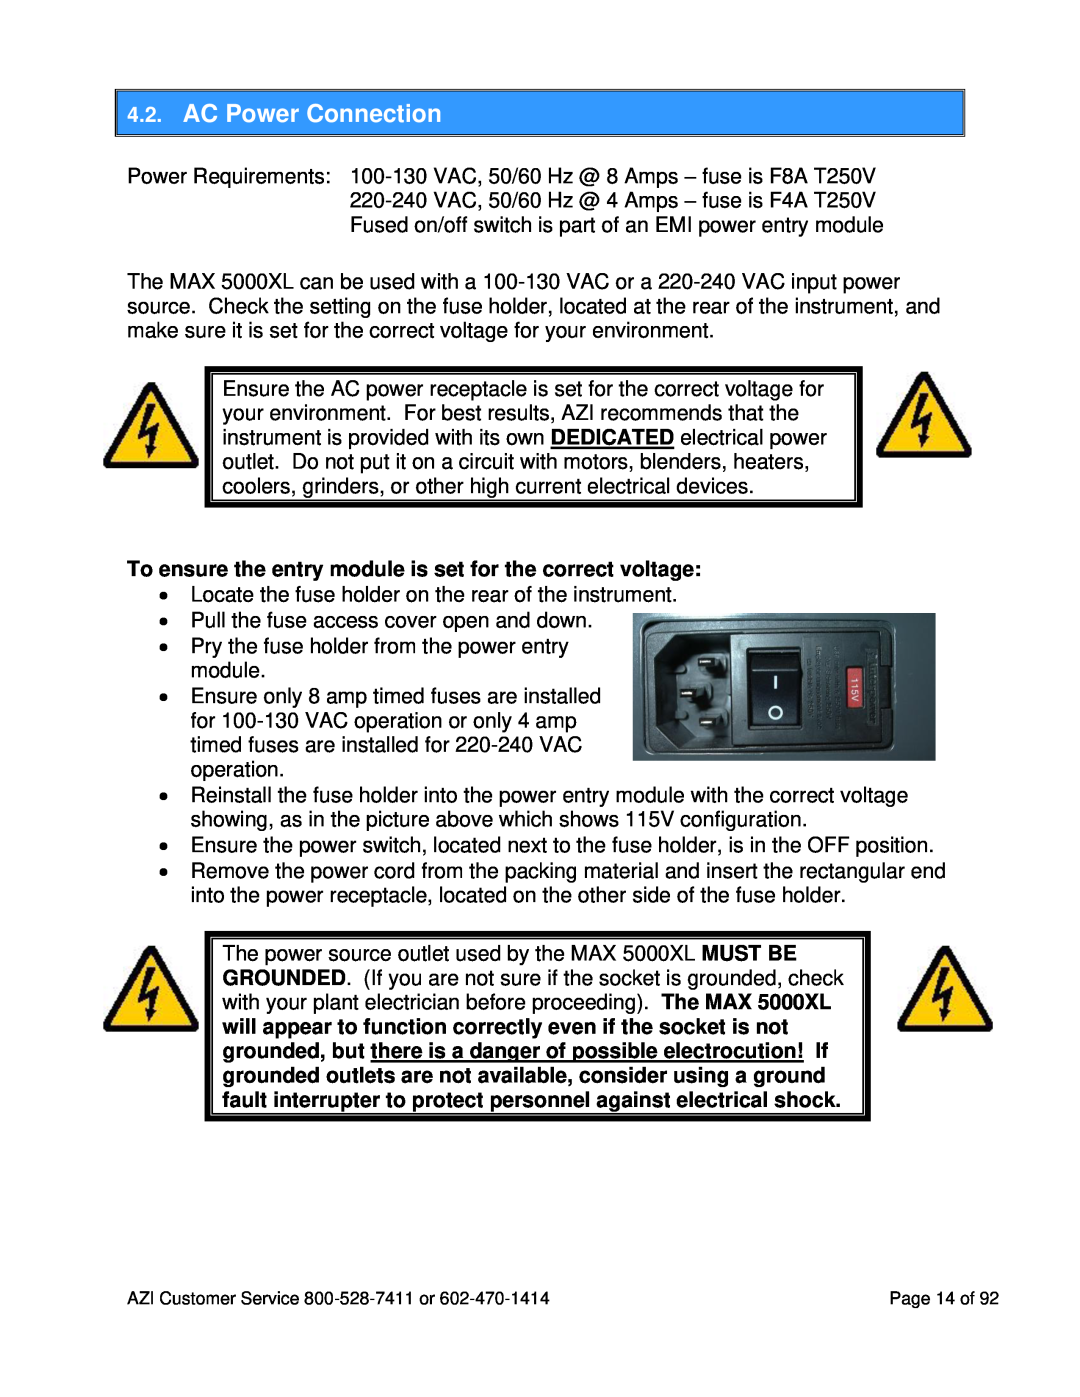 Arizona MAX-5000XL user manual AC Power Connection, To ensure the entry module is set for the correct voltage 